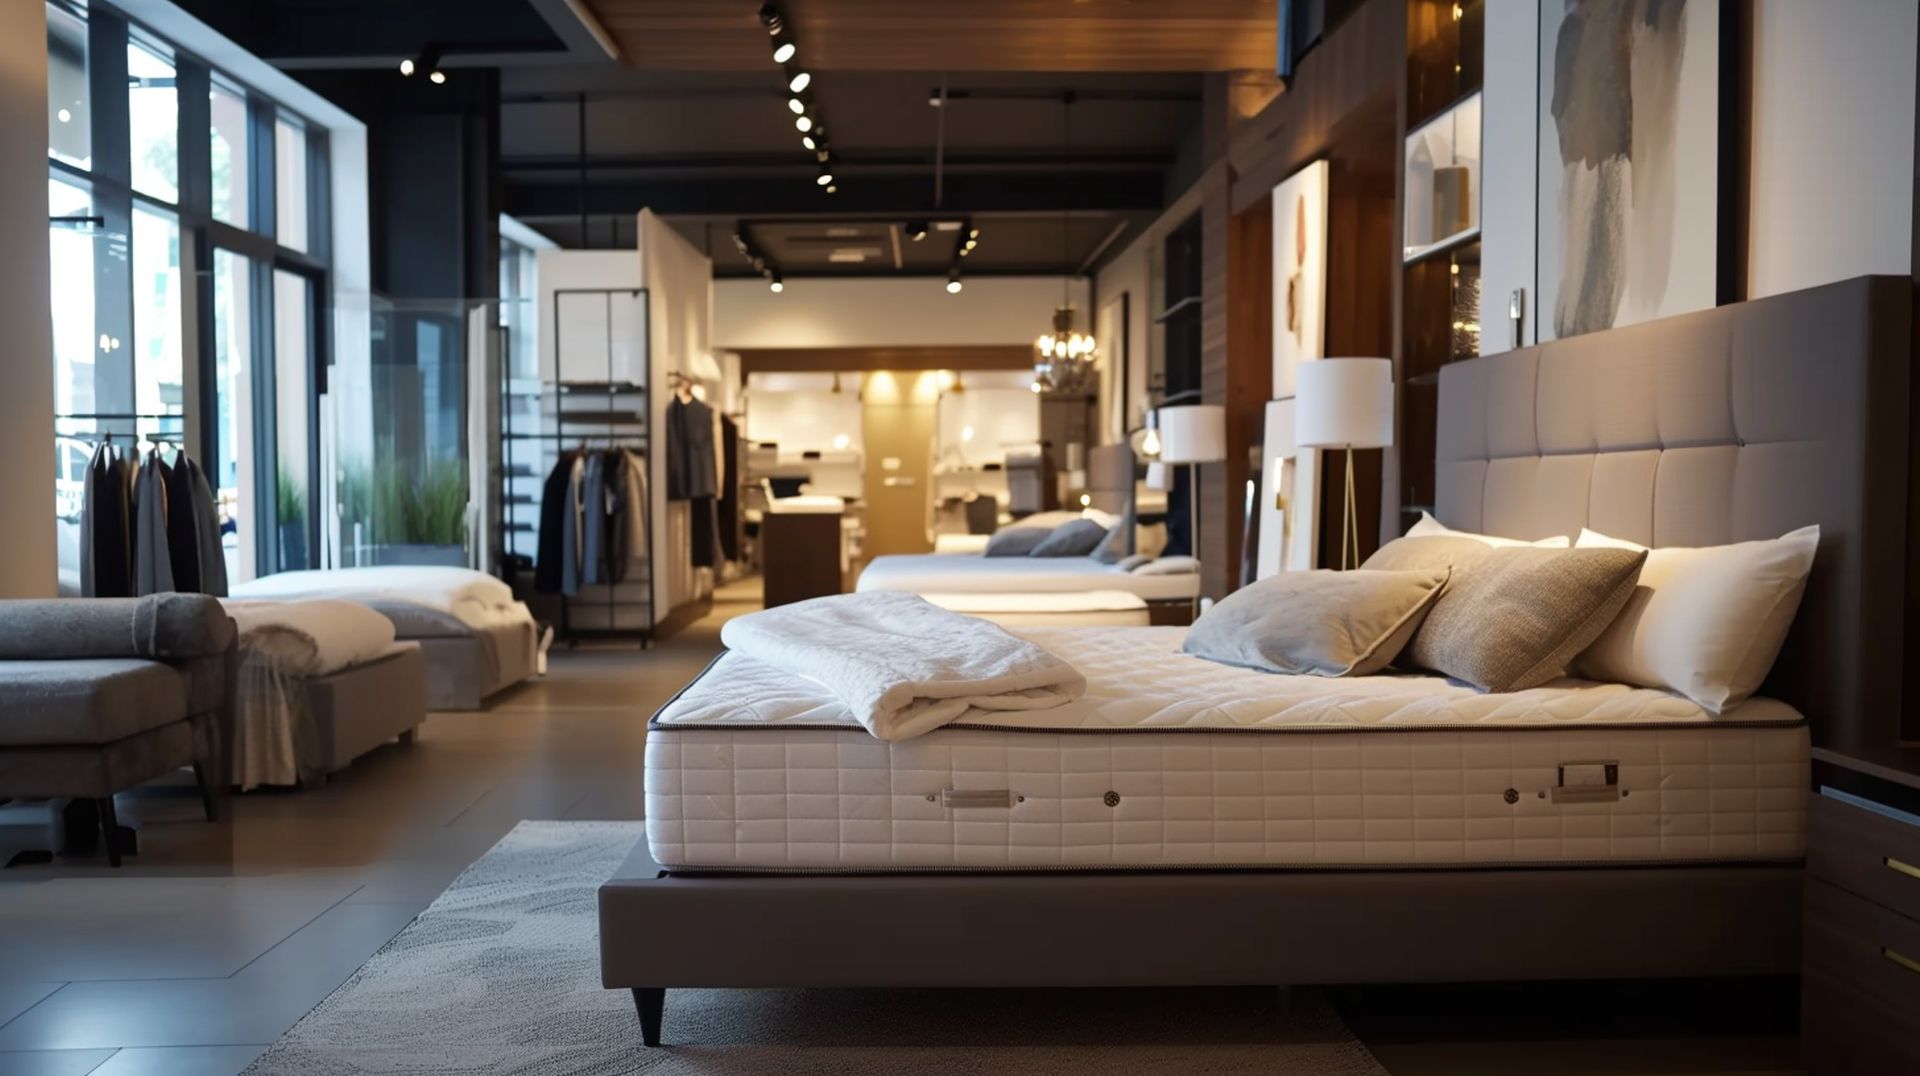 If you're looking for a new bed, mattress stores in Bristol offer the best customer and delivery service, financing, and warranties in Connecticut